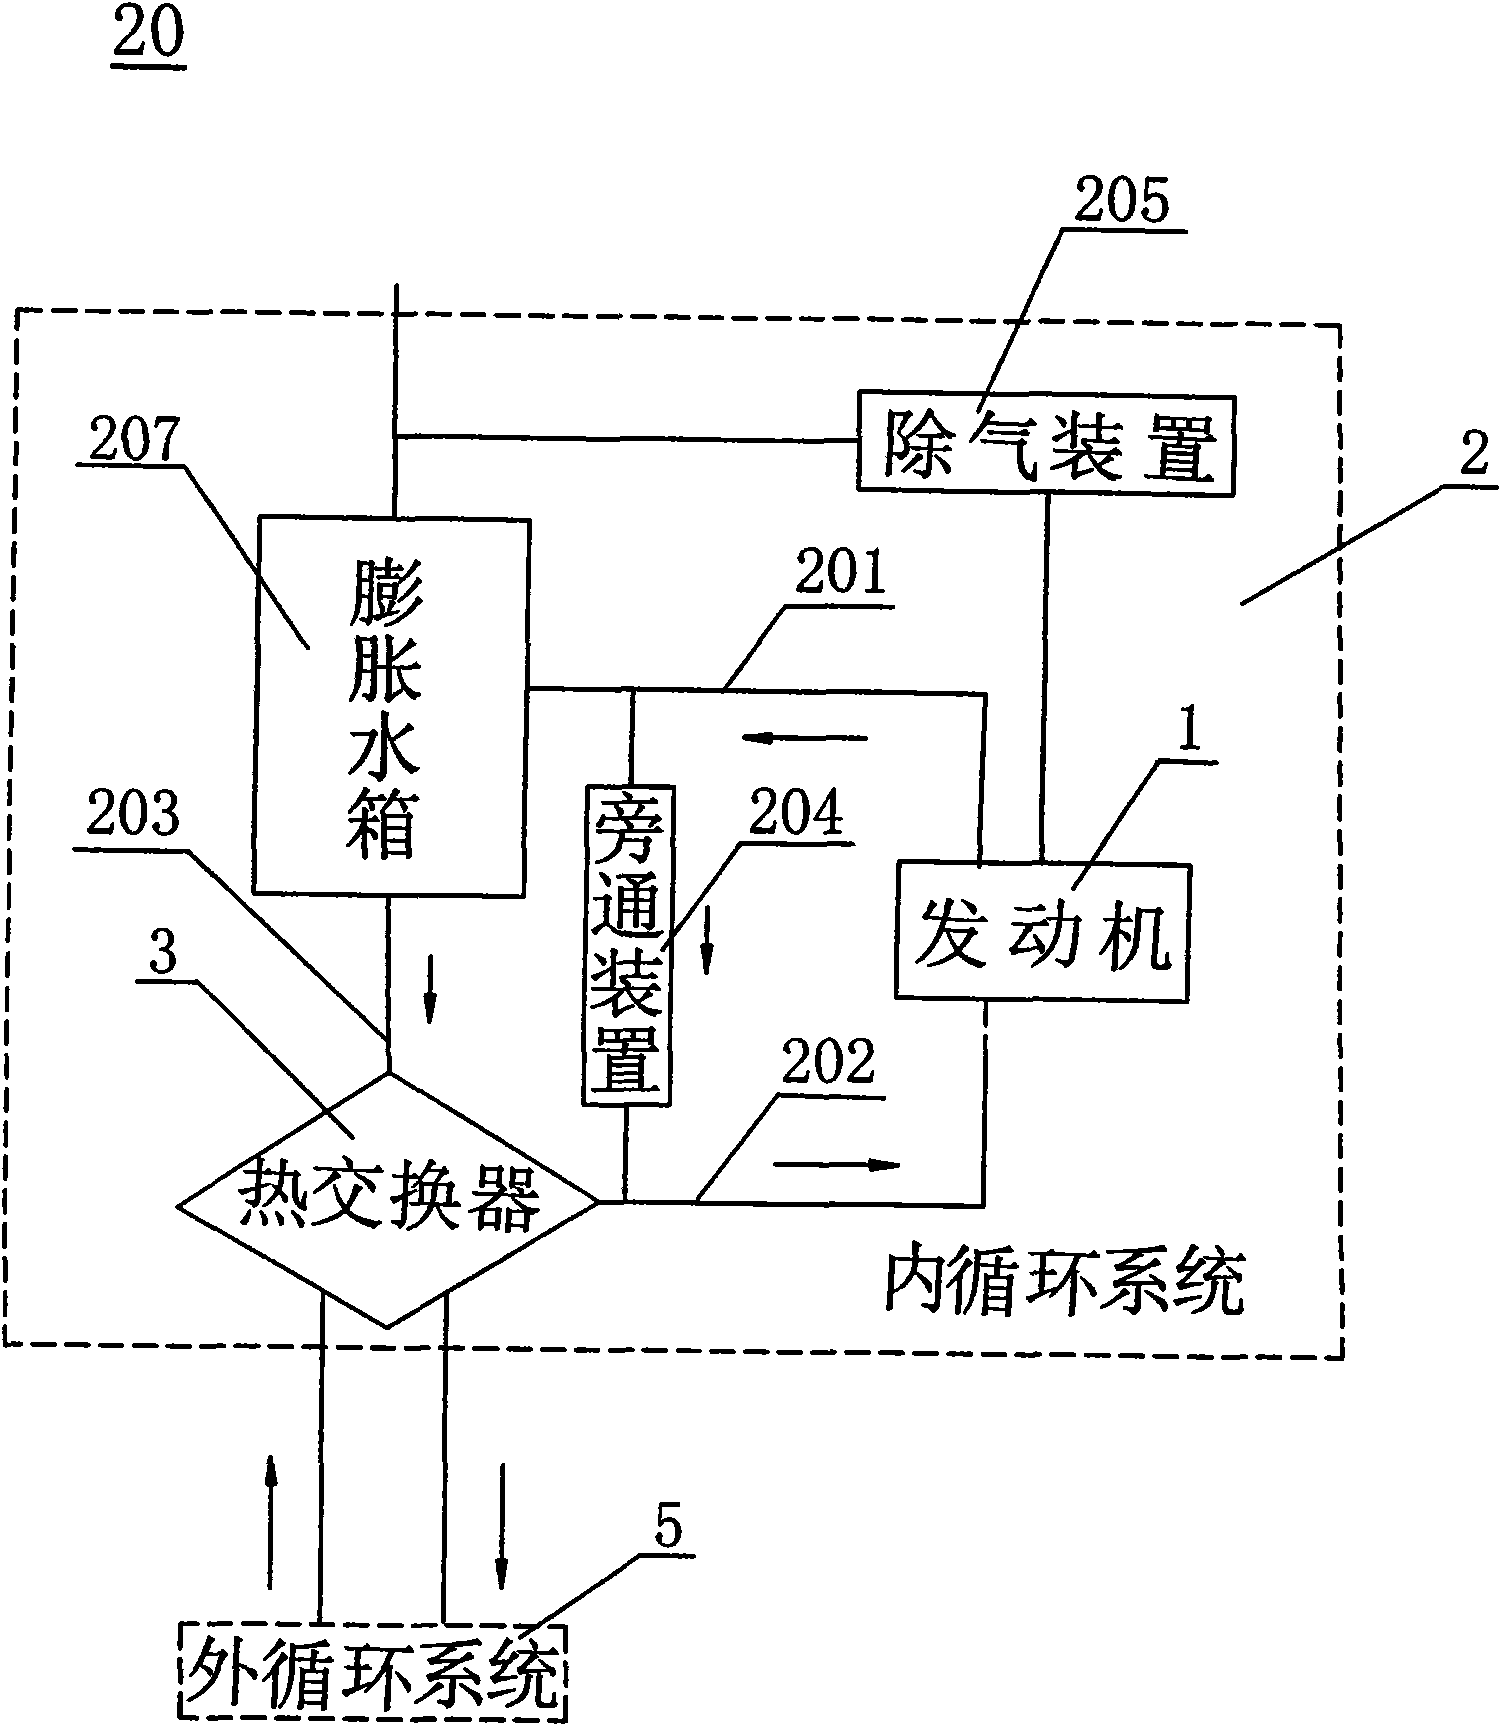 Cooling fluid temperature control system for testing engine performance